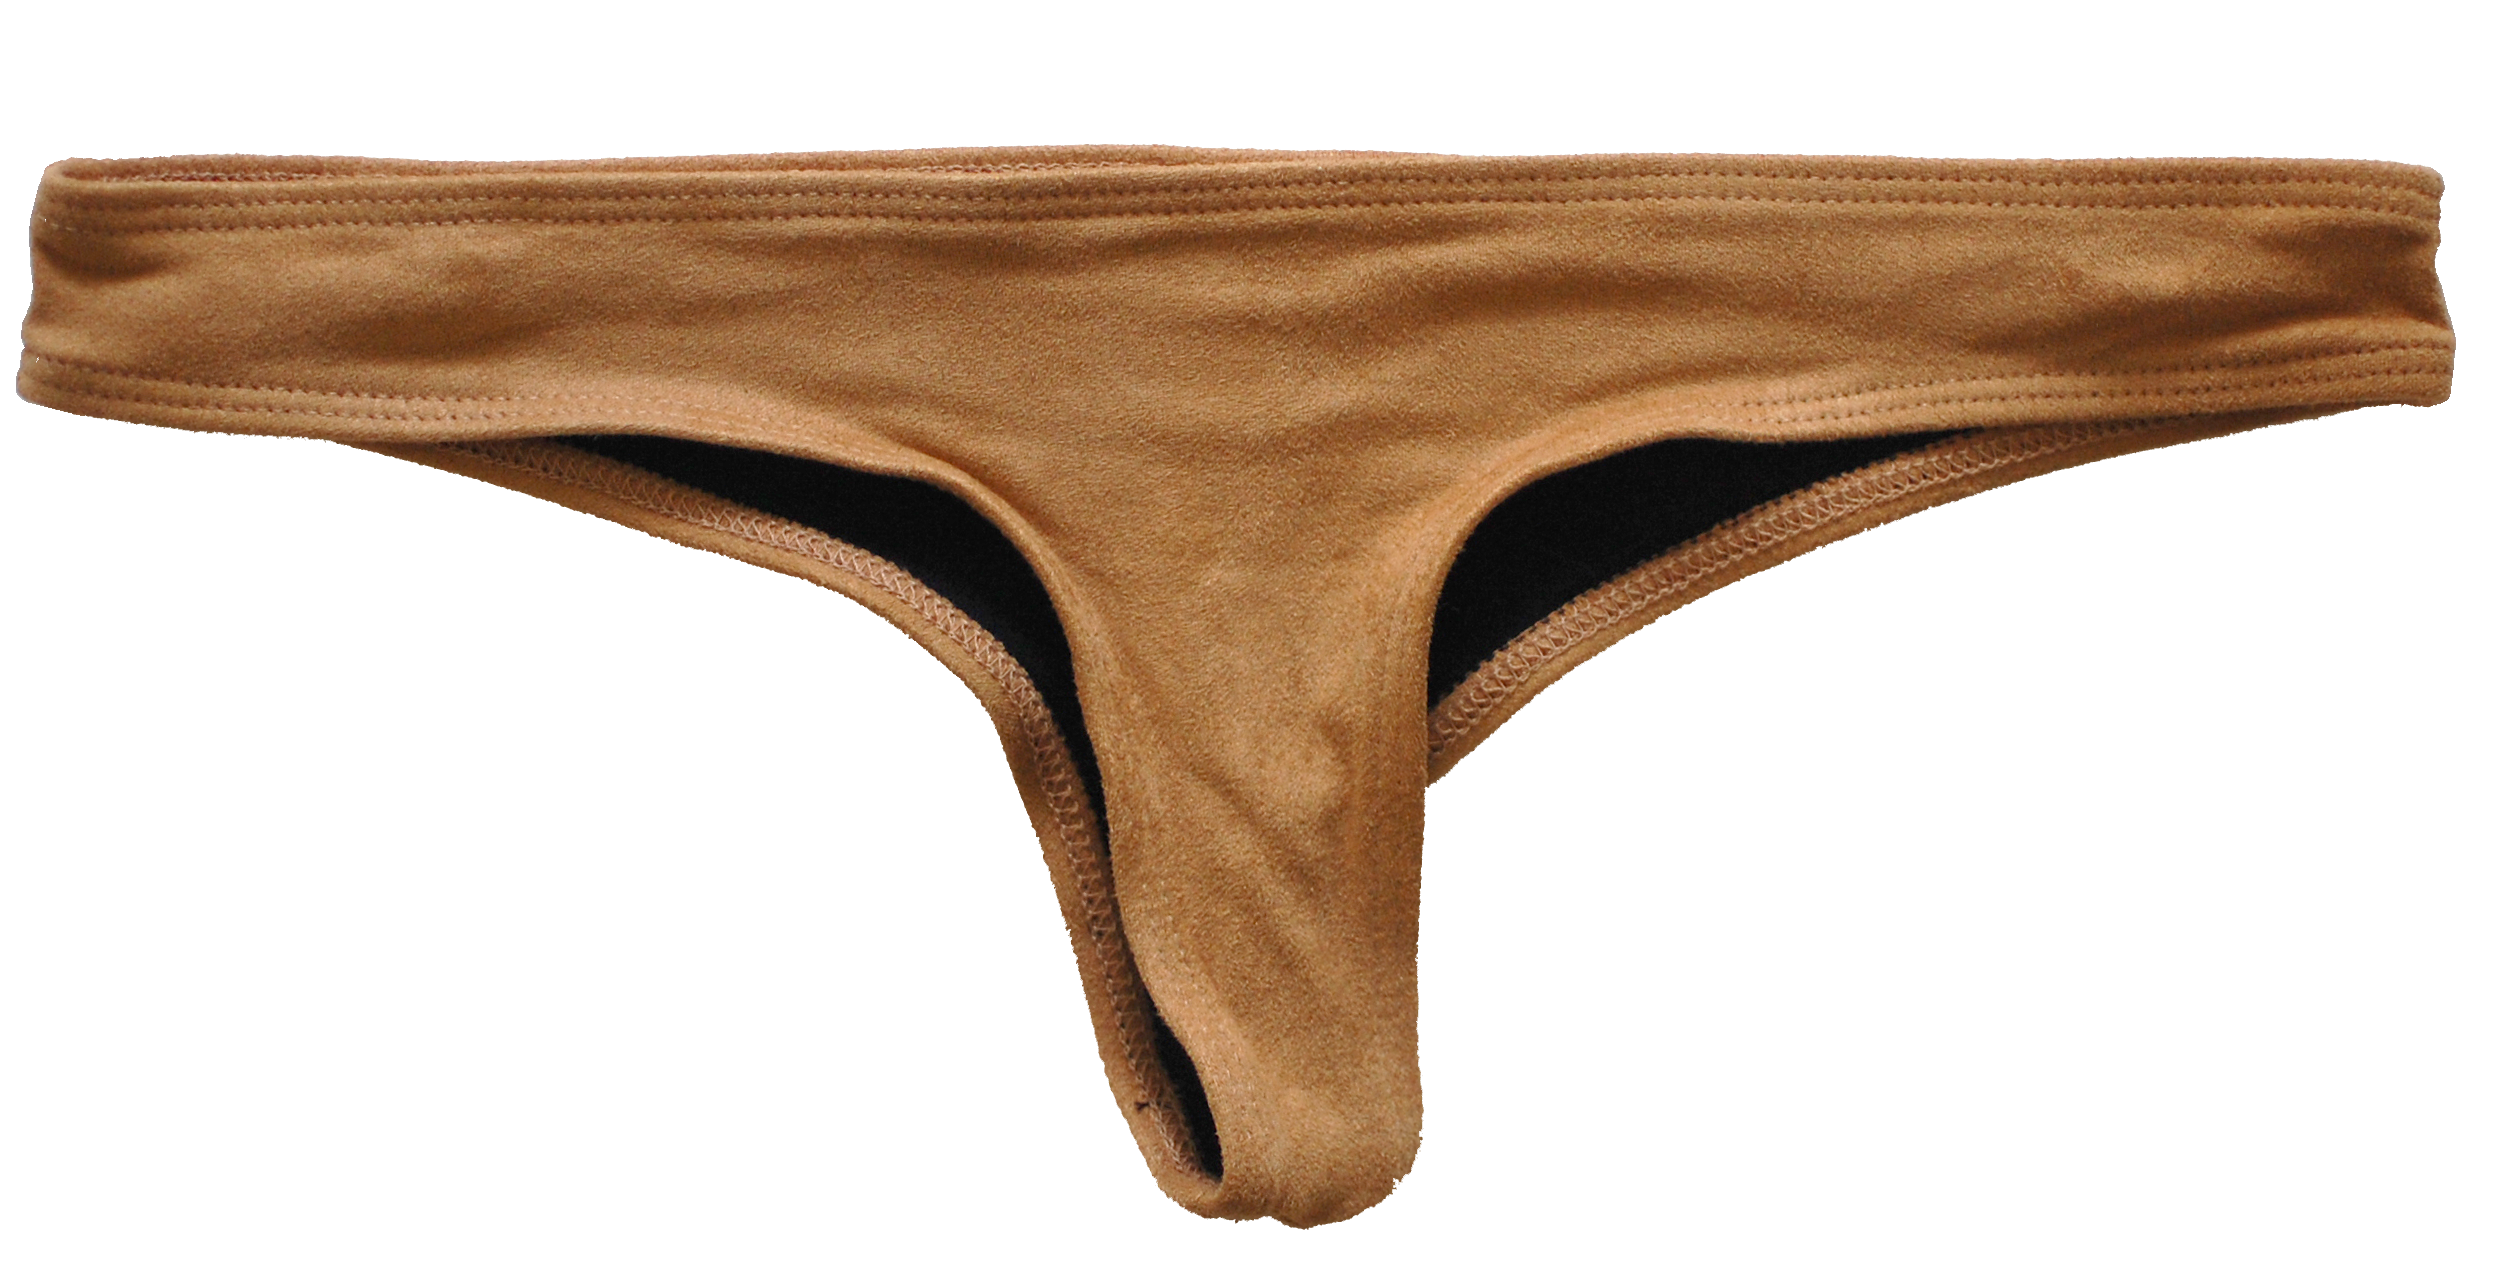 Faux suede low rise cheeky bottoms